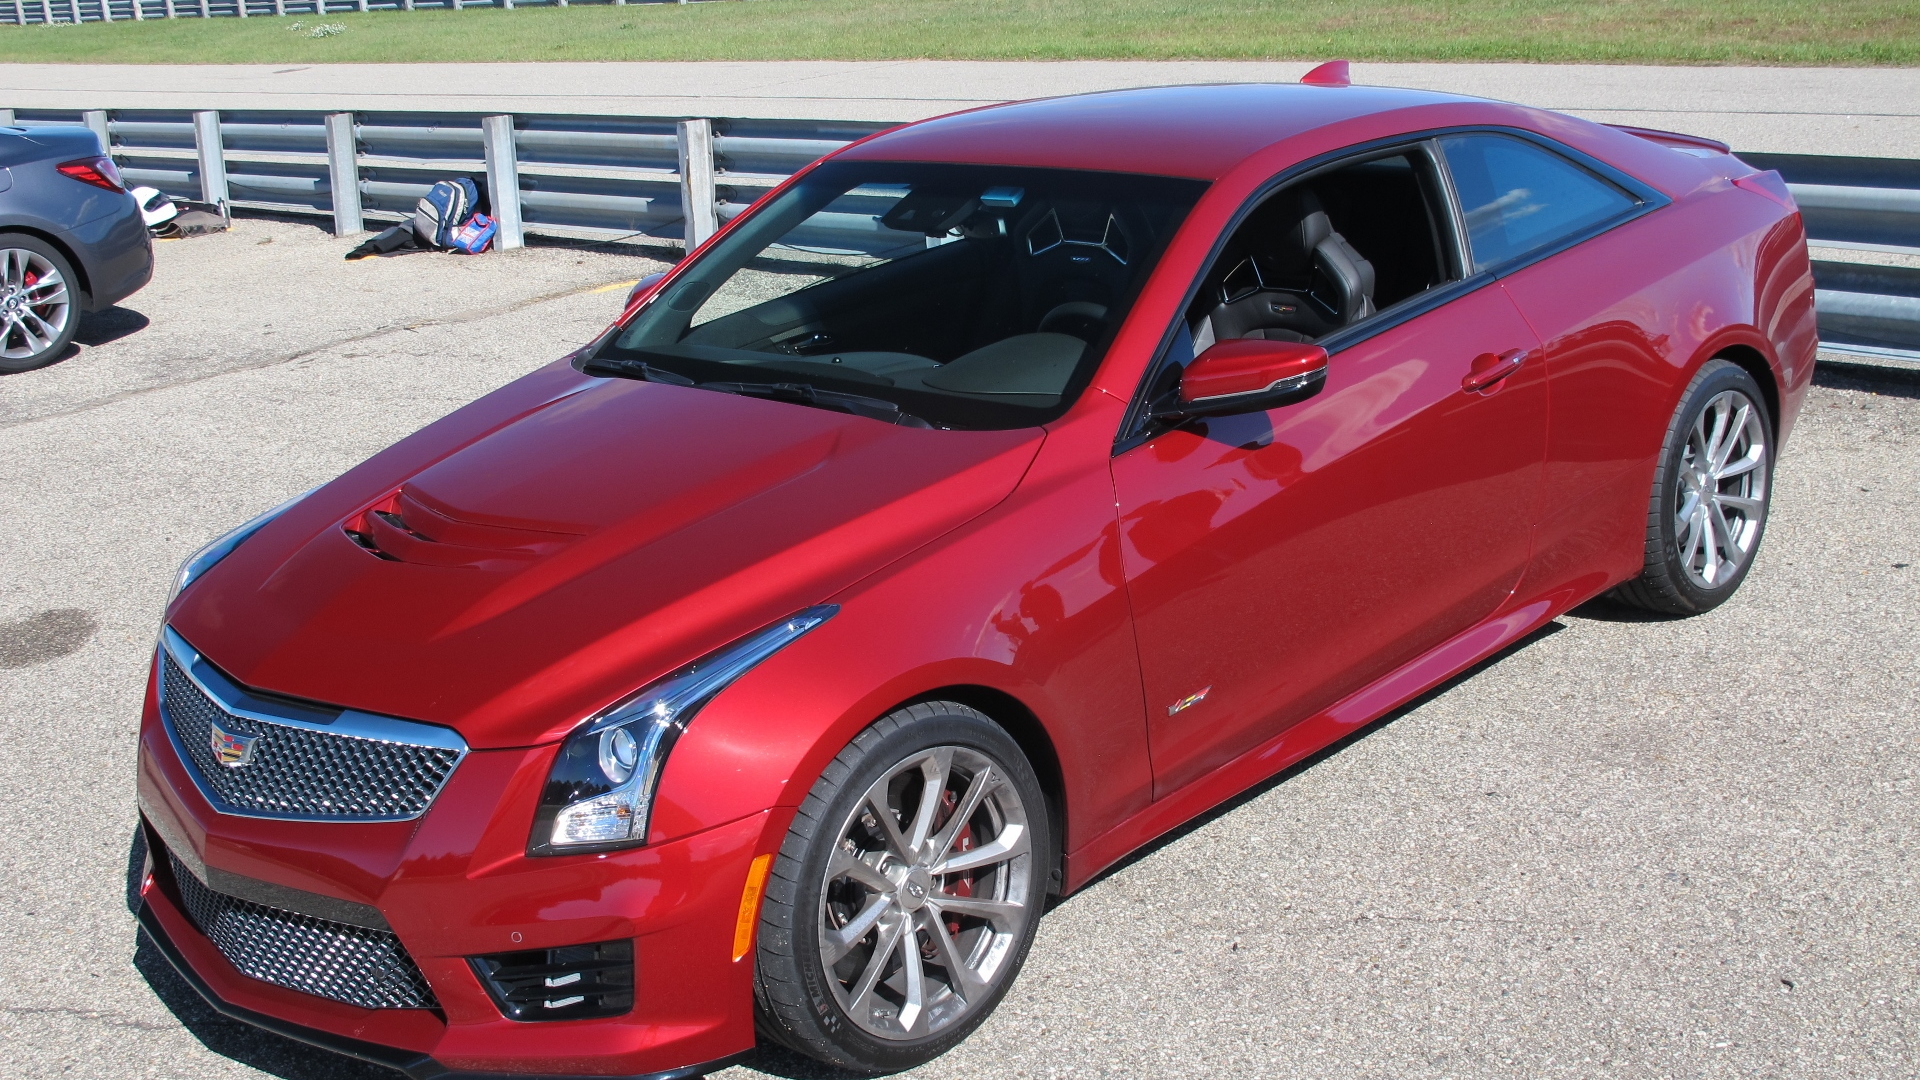 2016 Cadillac ATS-V Coupe track day event